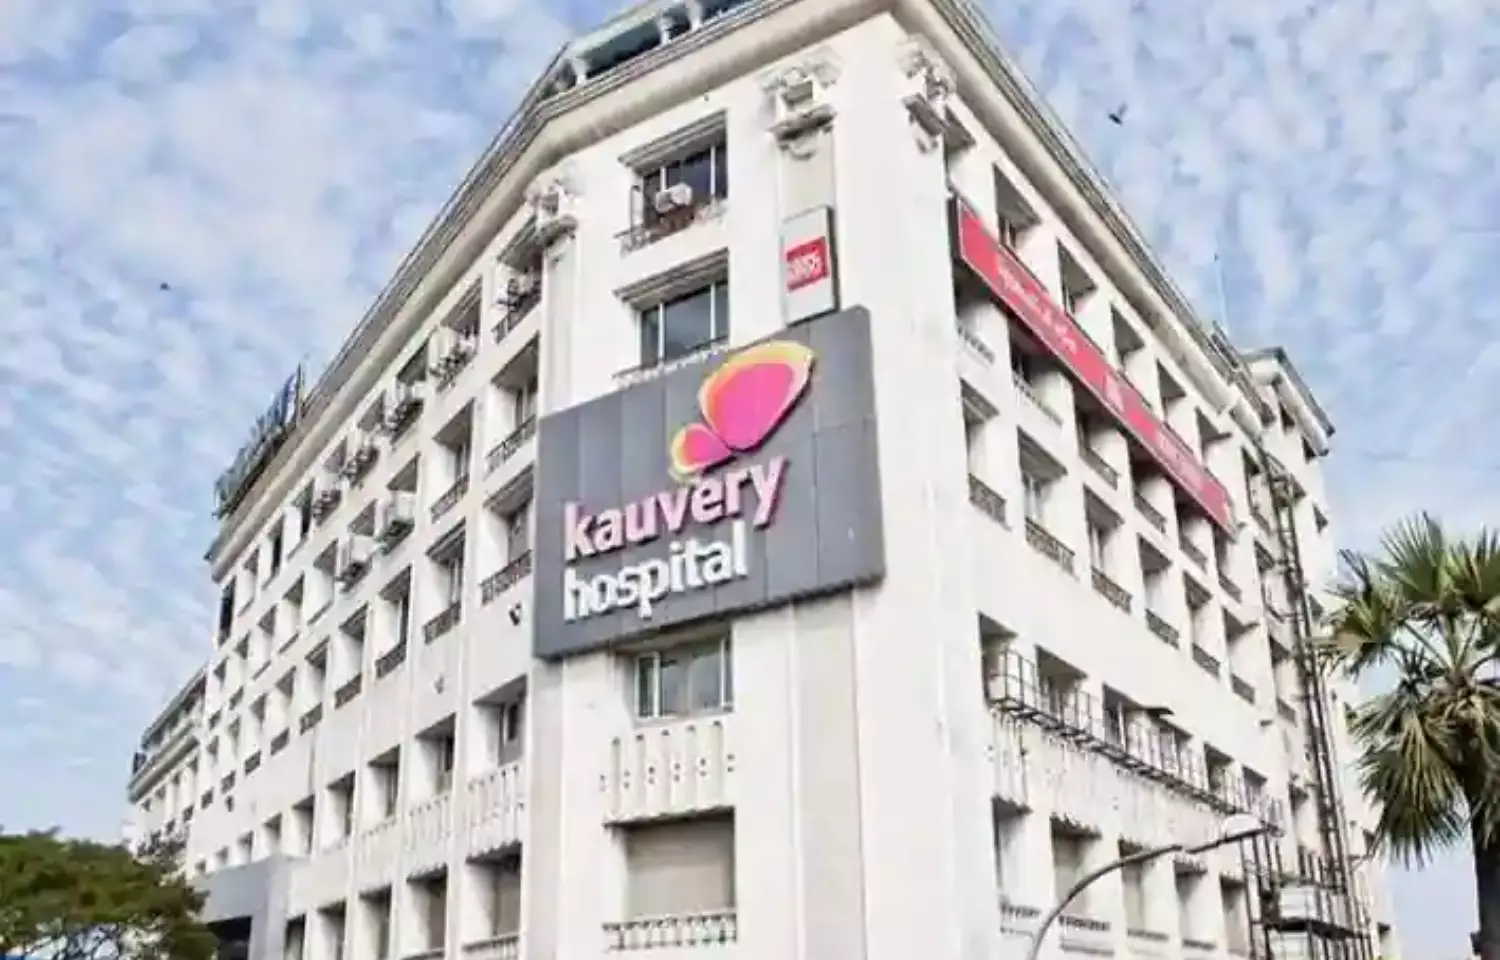 COVID patient with 100 percent lung involvement treated at Kauvery Hospital